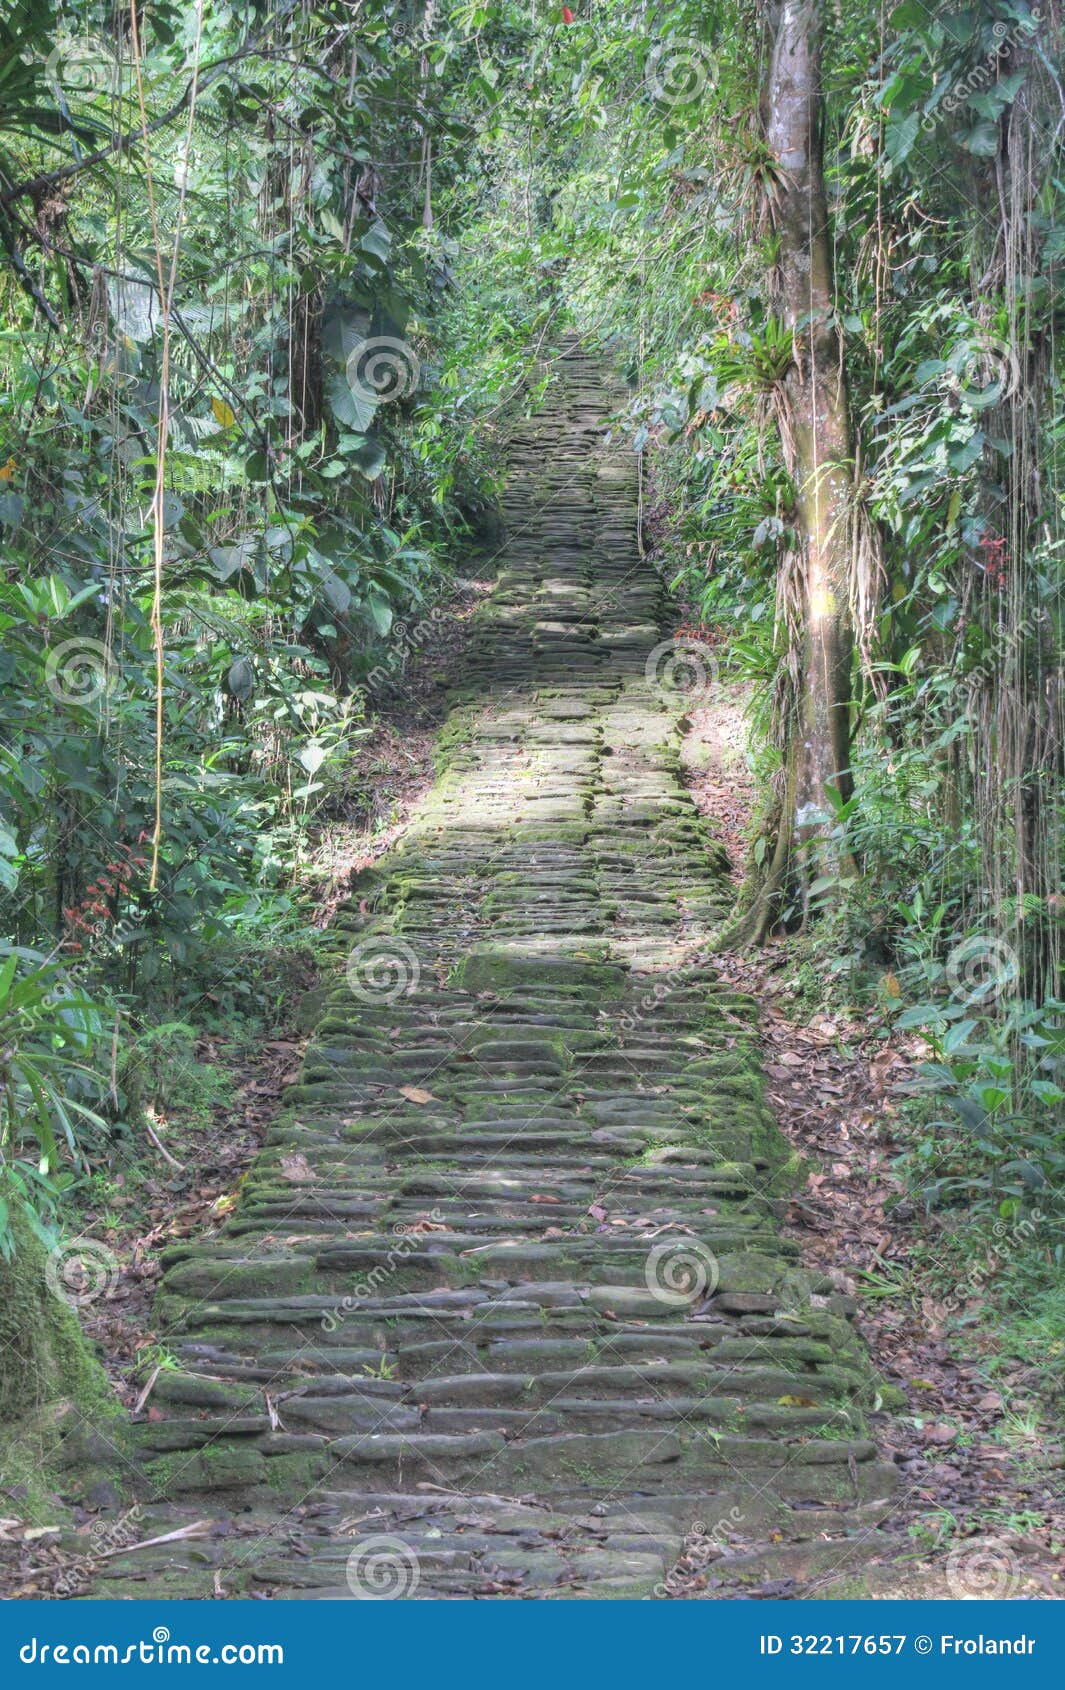 indigenous stone stairs in ciudad perdida archeological site